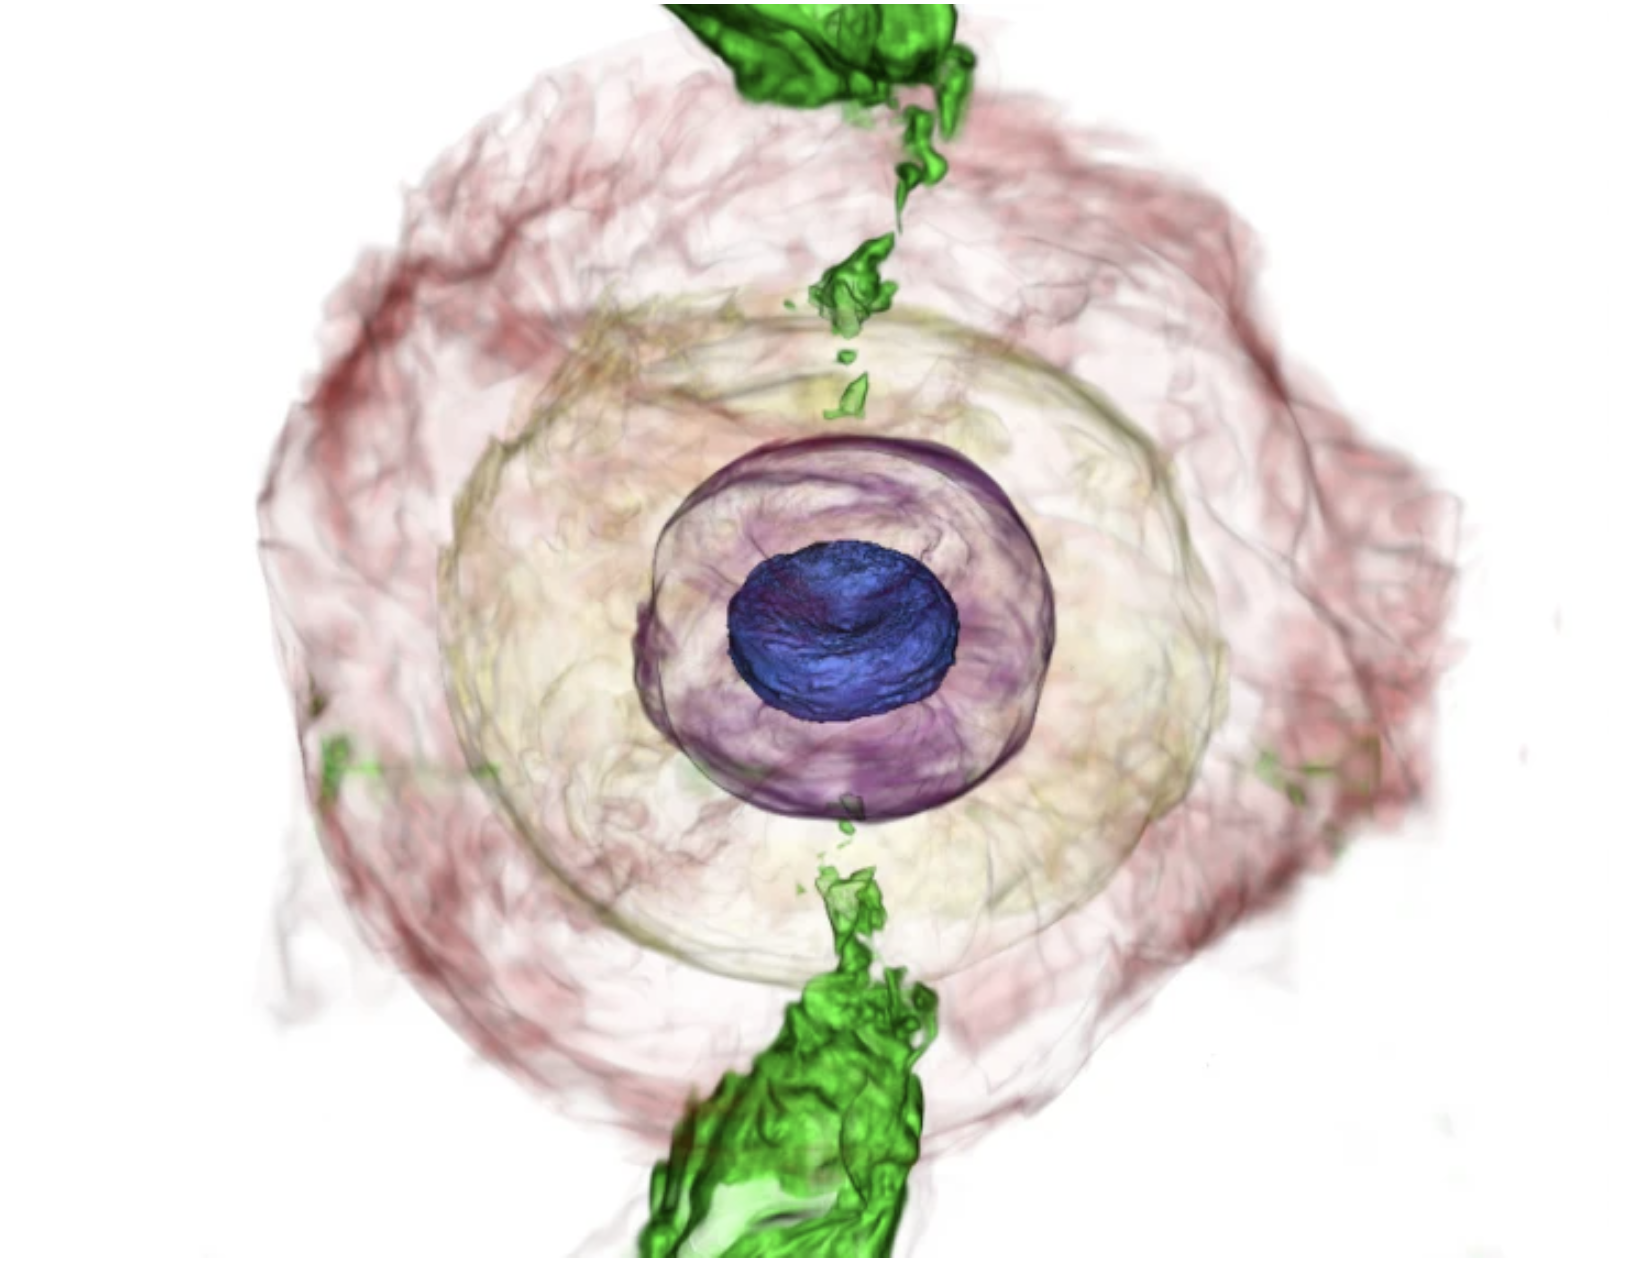 Colourful representation of the aftermath of a neutron-star merger.